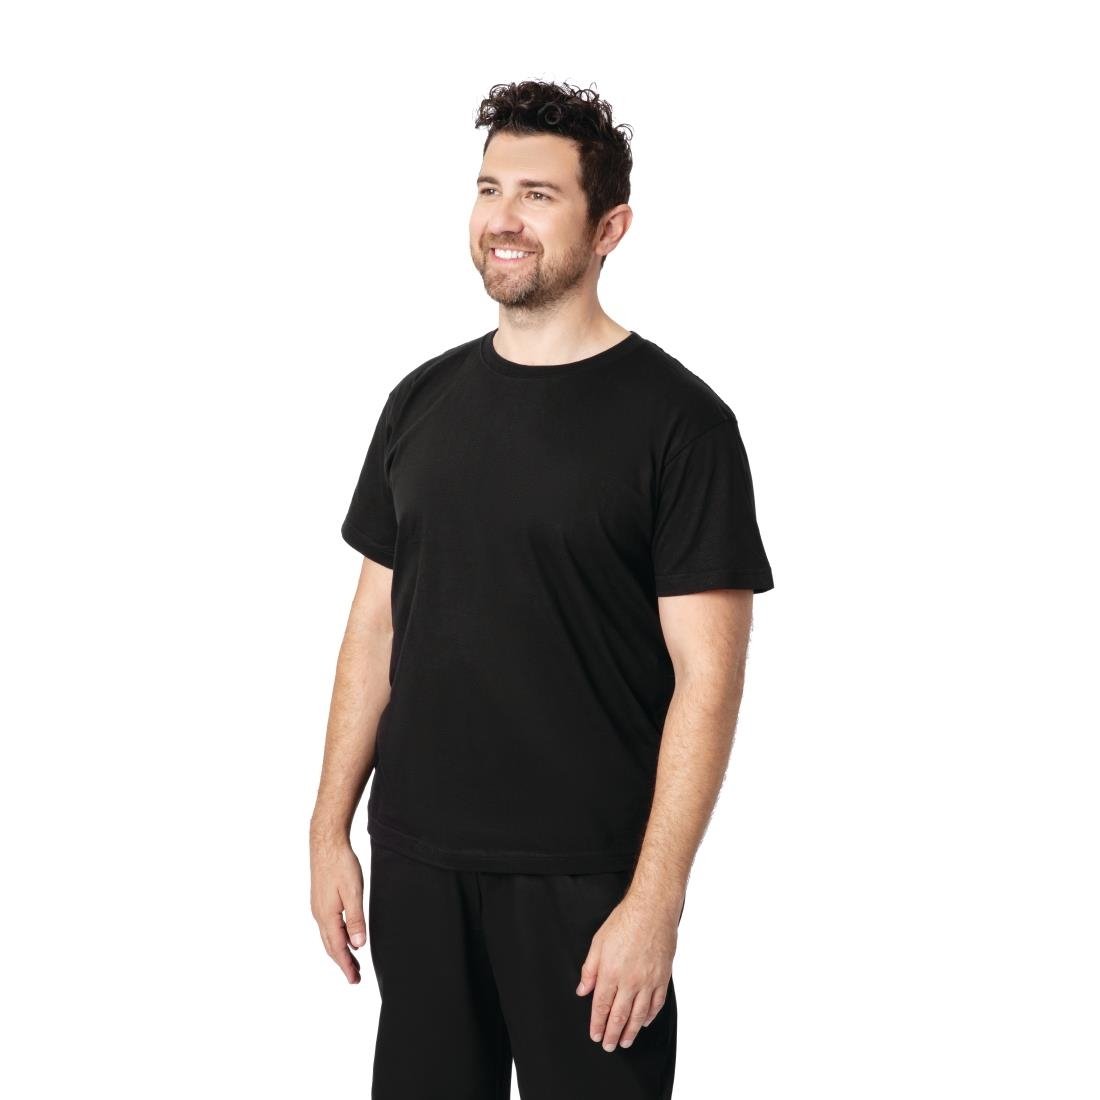 A295-S Unisex Chef T-Shirt Black S JD Catering Equipment Solutions Ltd